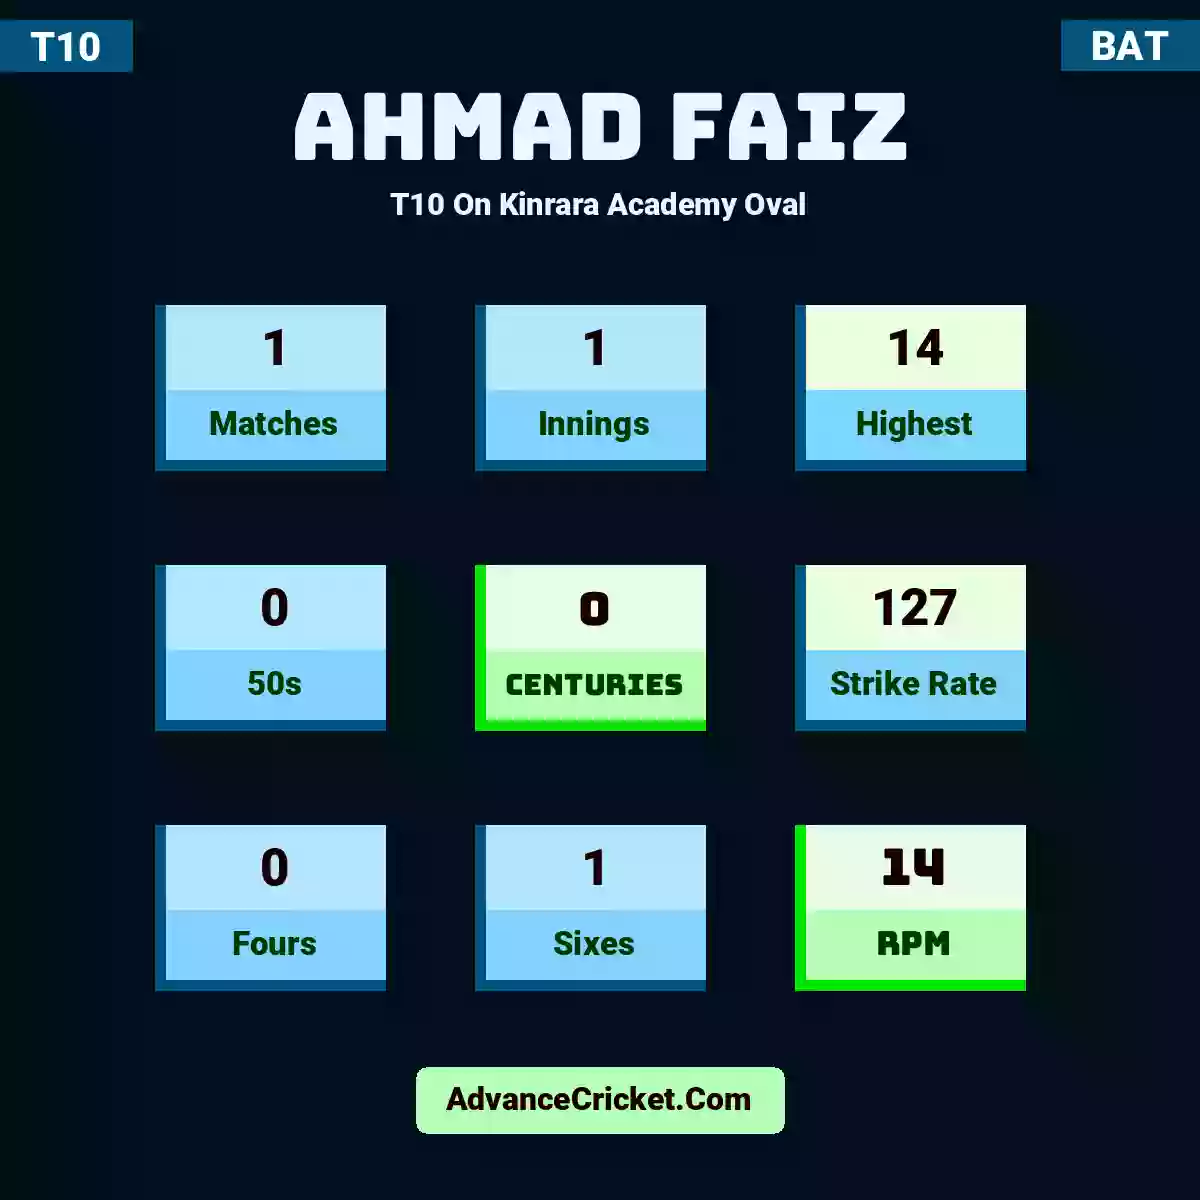 Ahmad Faiz T10  On Kinrara Academy Oval, Ahmad Faiz played 1 matches, scored 14 runs as highest, 0 half-centuries, and 0 centuries, with a strike rate of 127. A.Faiz hit 0 fours and 1 sixes, with an RPM of 14.